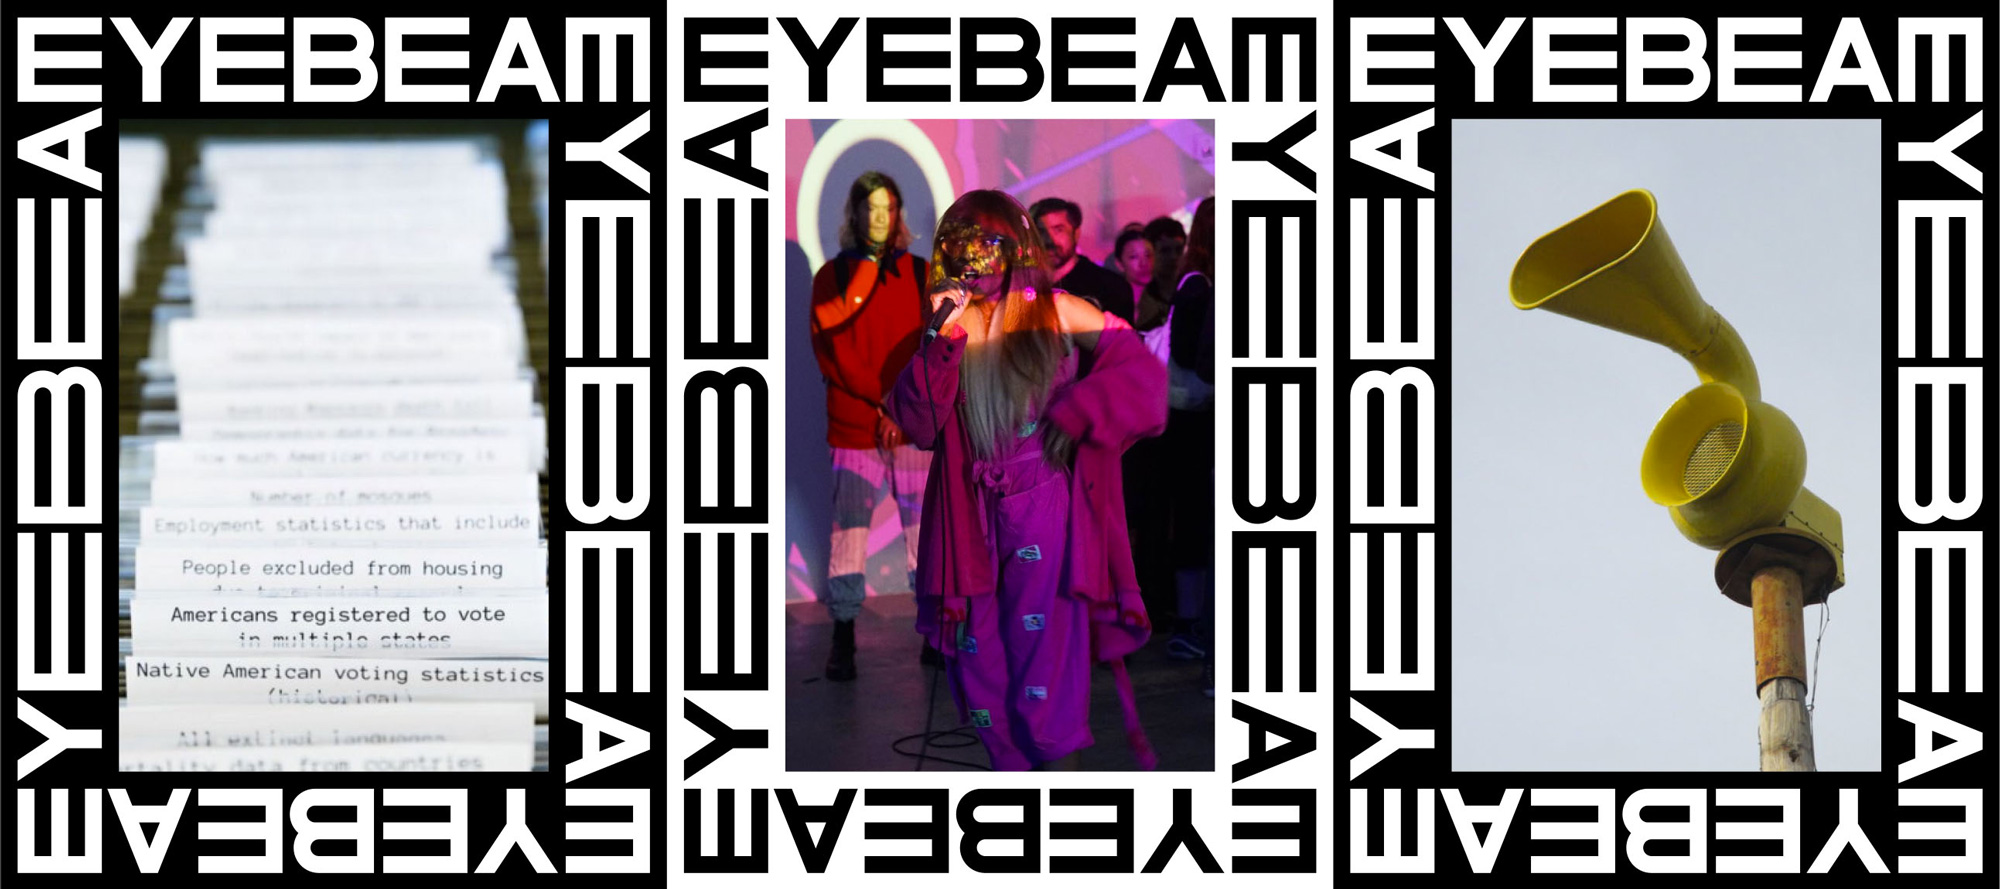 New Logo and Identity for Eyebeam by Mother Design